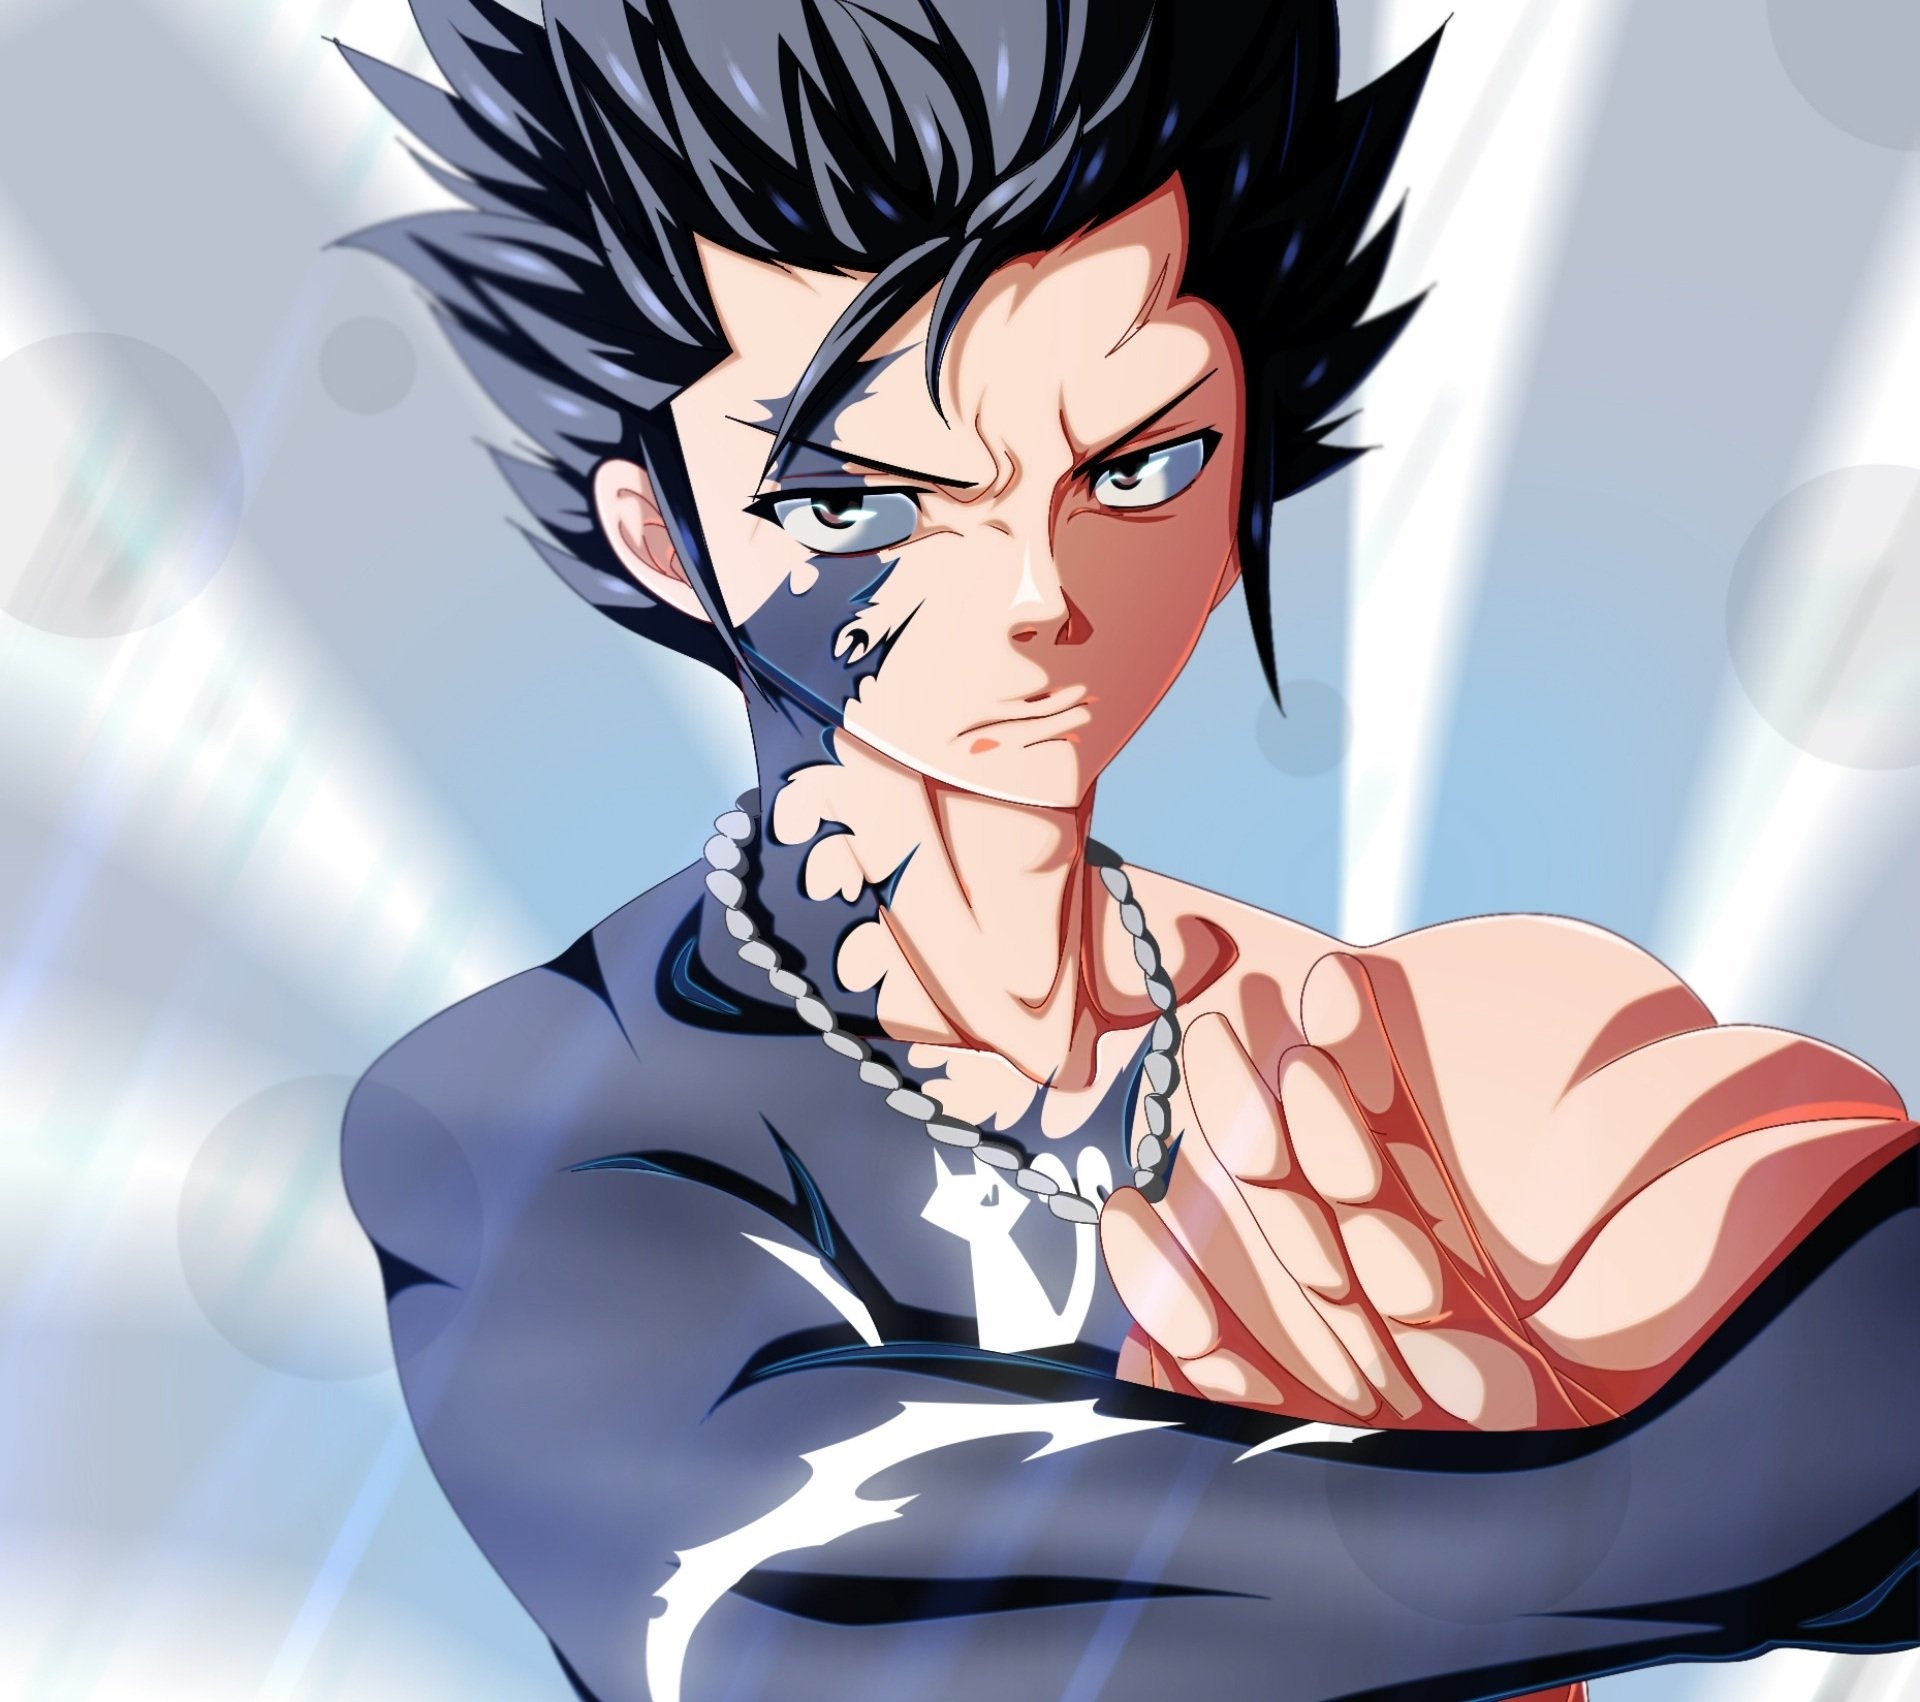 Gray Fullbuster: Gray's abilities to withstand cold temperatures, Fairy Tail, Illustrated by Hiro Mashima. 1920x1710 HD Wallpaper.